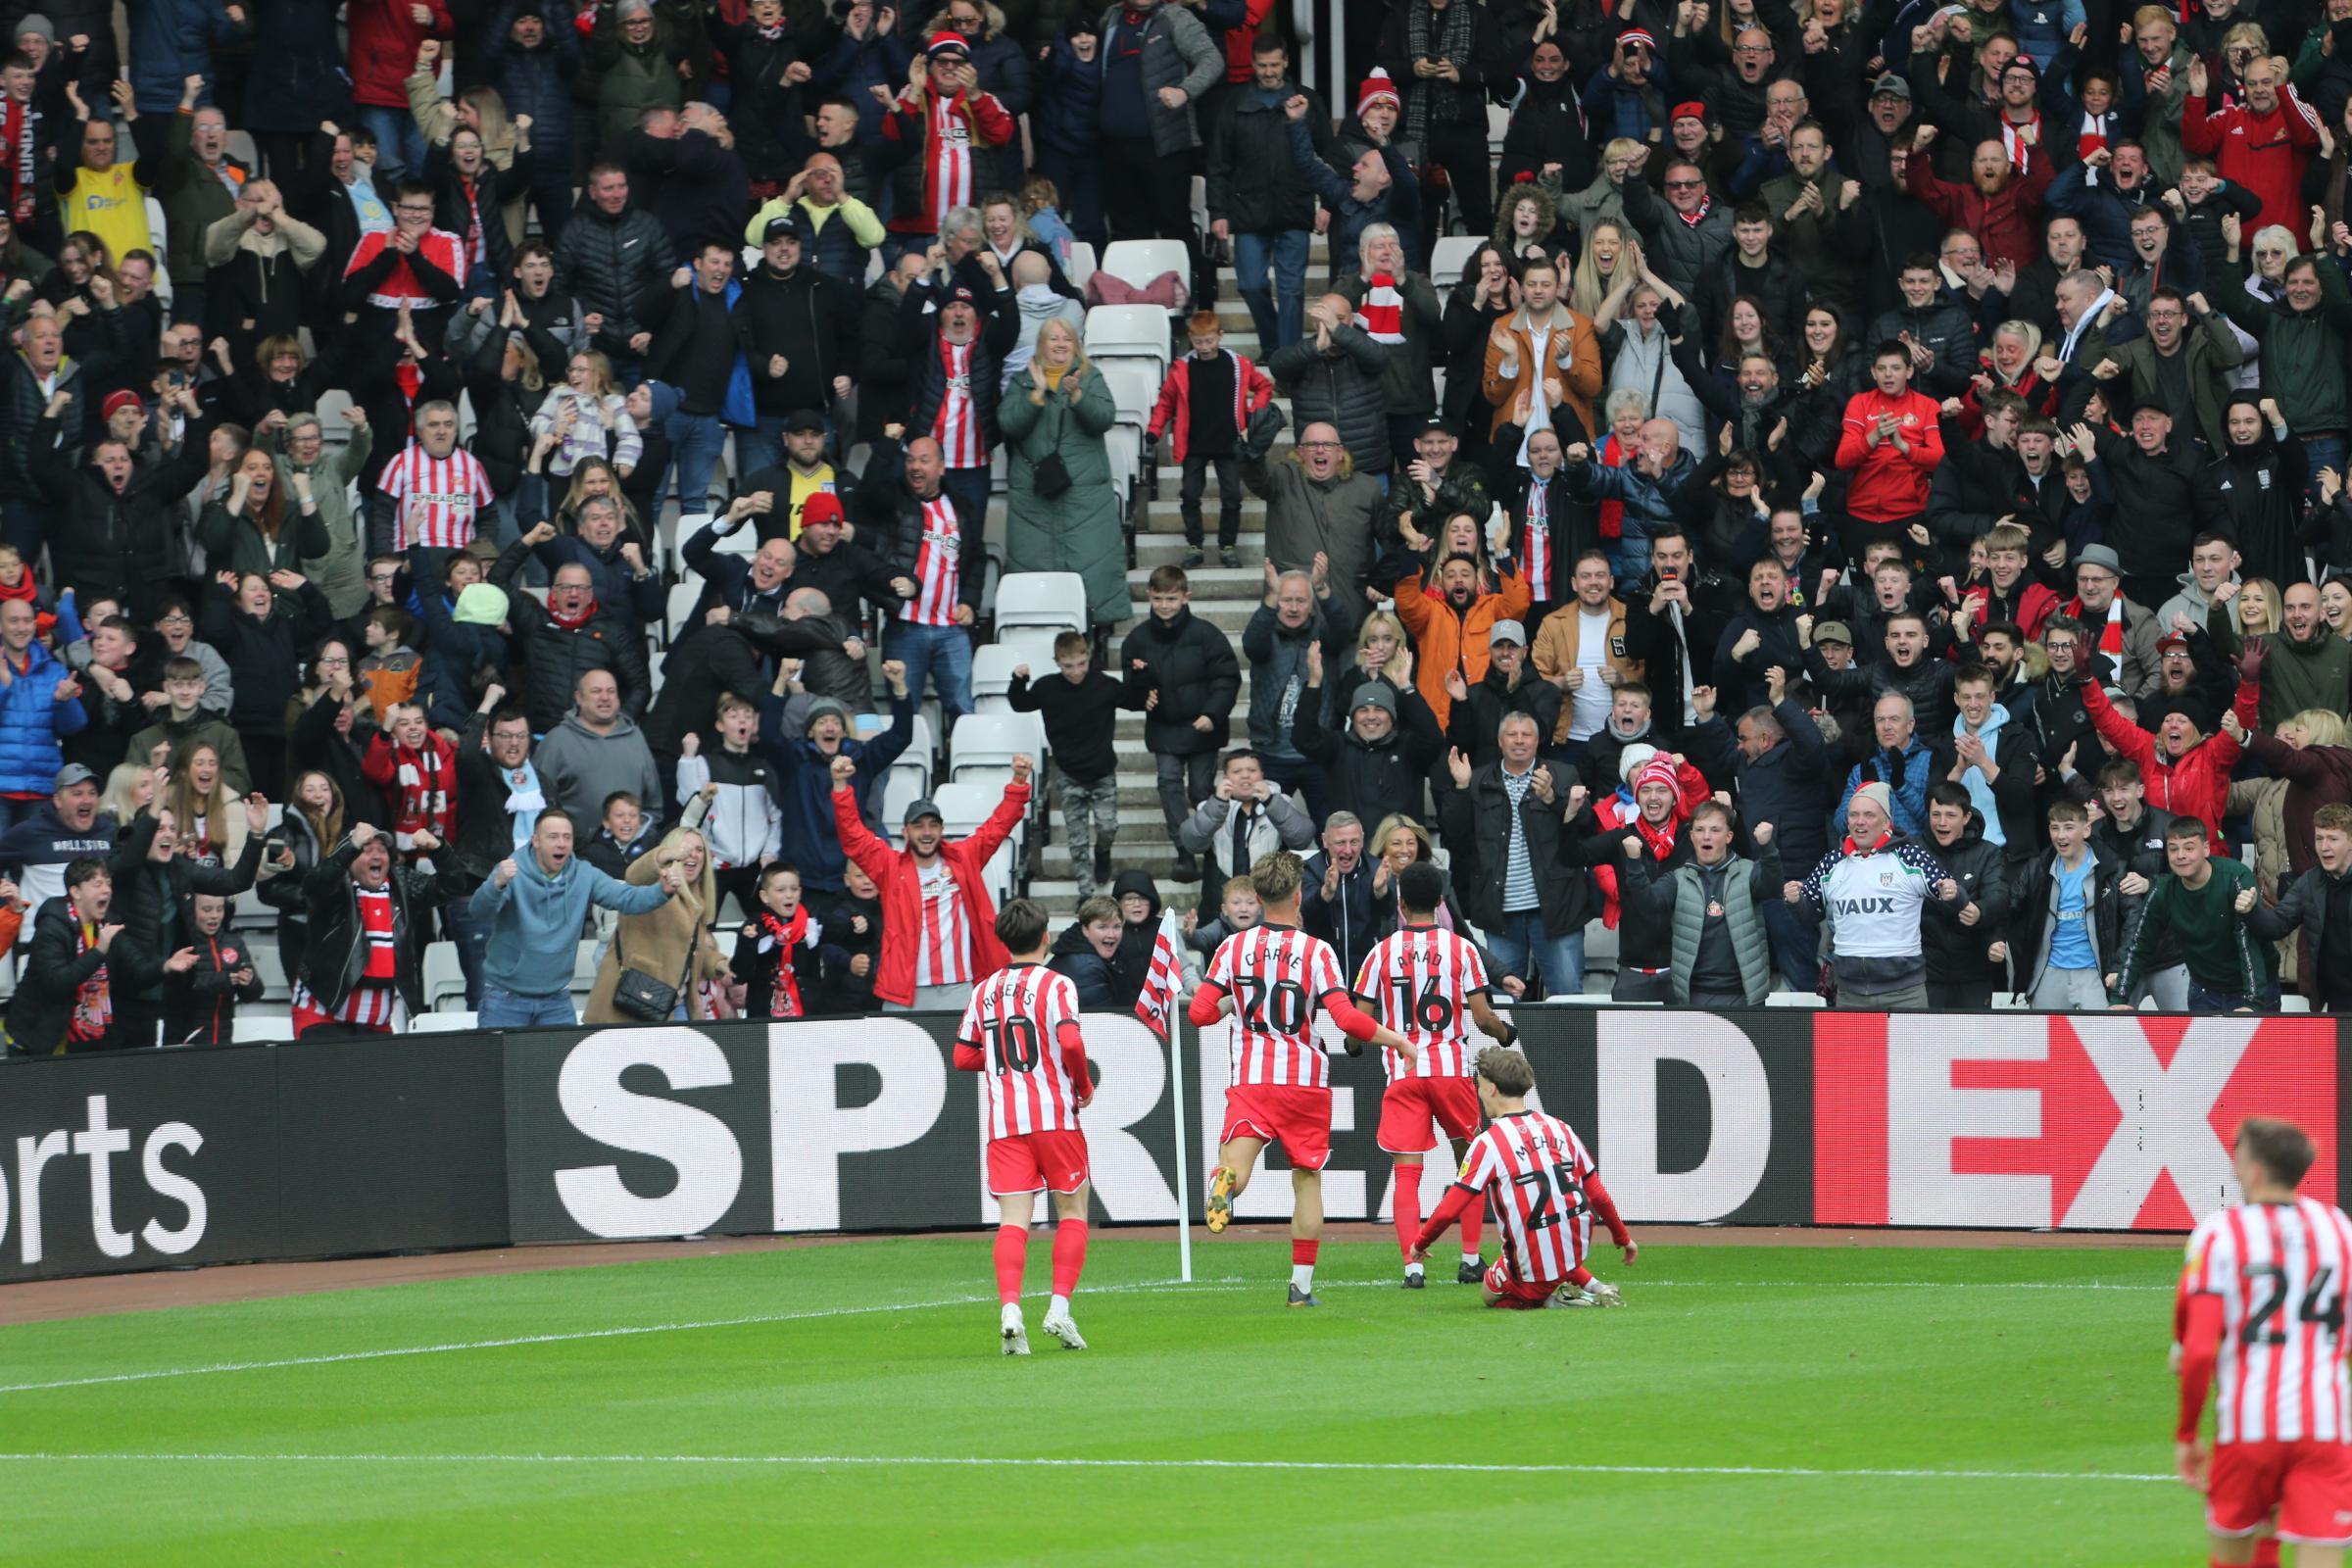 Sunderland 4-4 Hull City: Last second twist in dramatic game